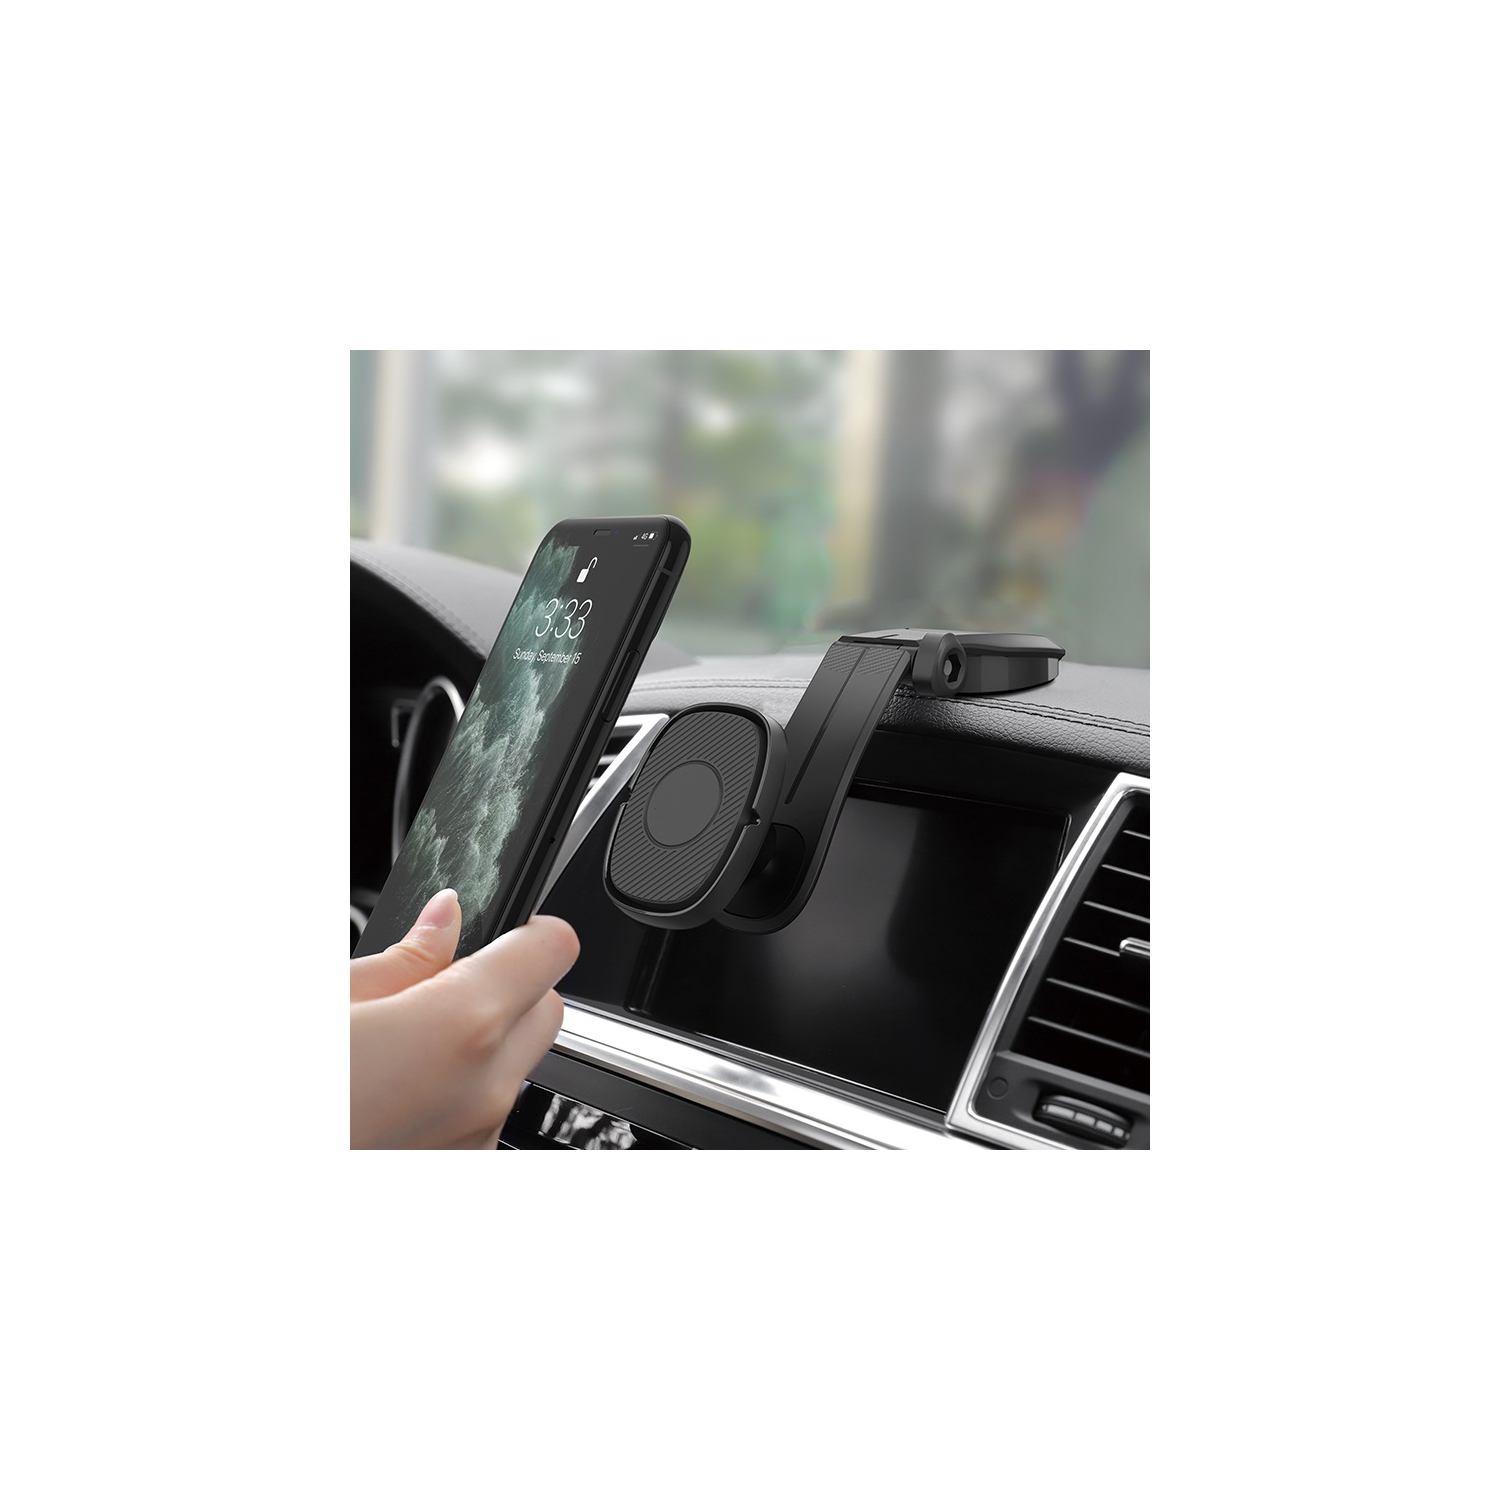 【CSmart】 360 Rotating Universal Stick On Dashboard Magnetic Car Cell Phone Mount Holder for iPhone Samsung Smartphones